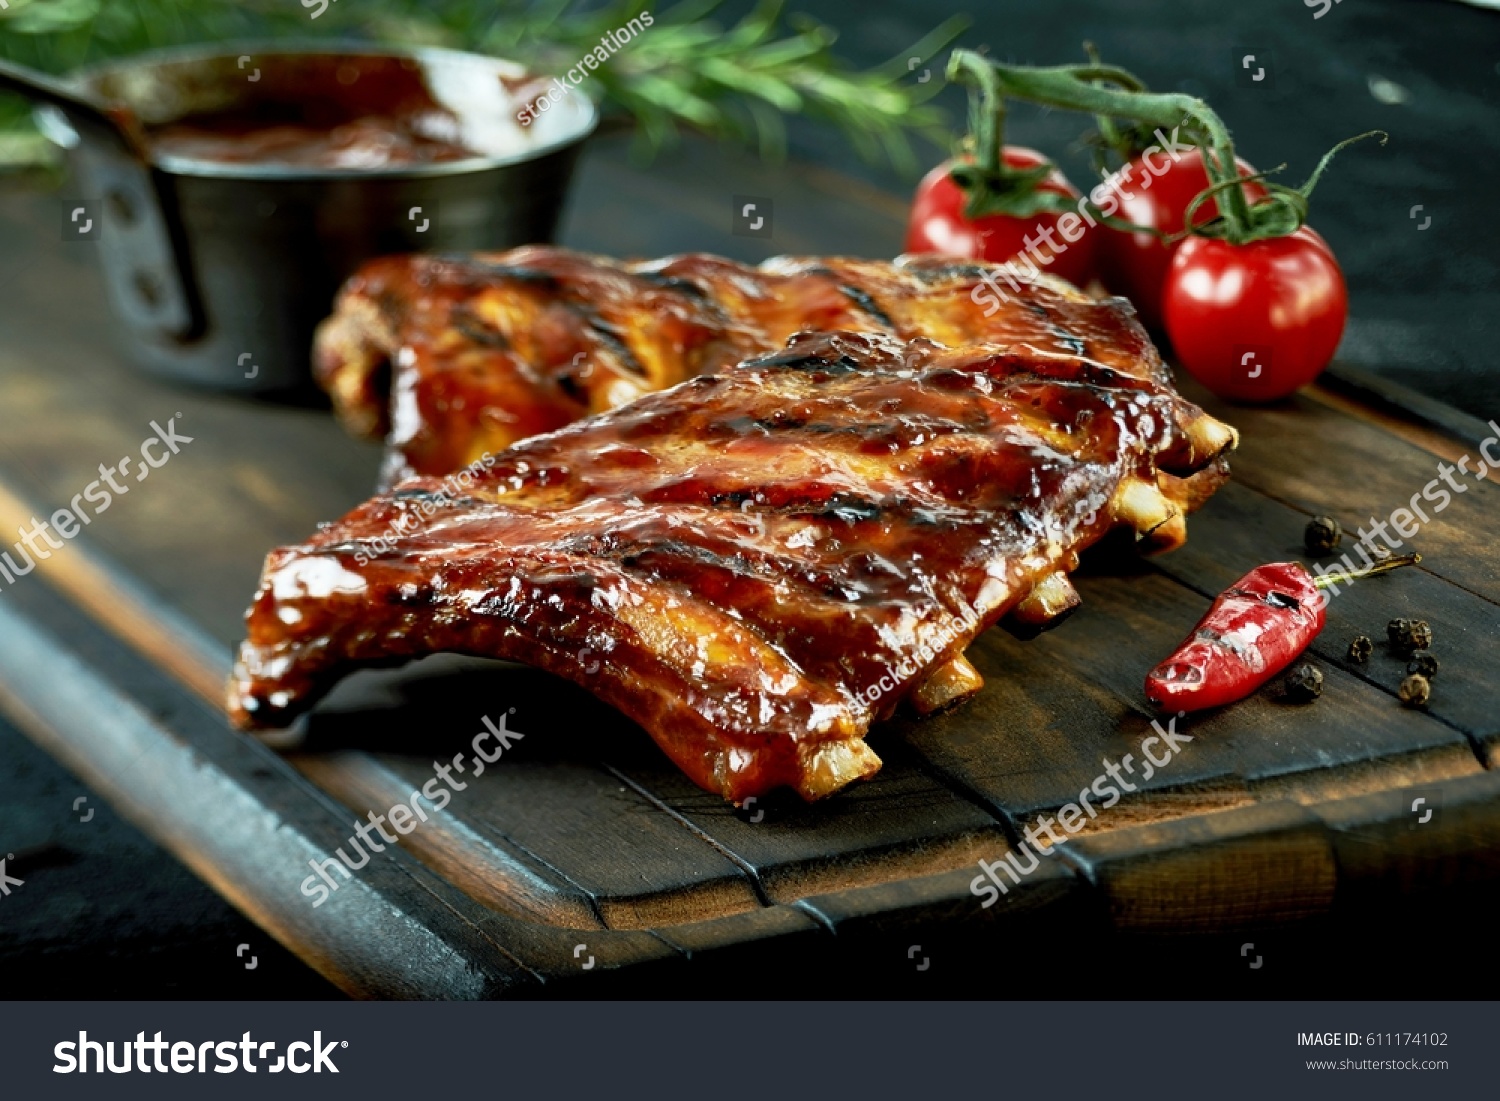 Spicy hot grilled spare ribs from a summer BBQ served with a hot chili pepper and fresh tomatoes on an old vintage wooden cutting board #611174102